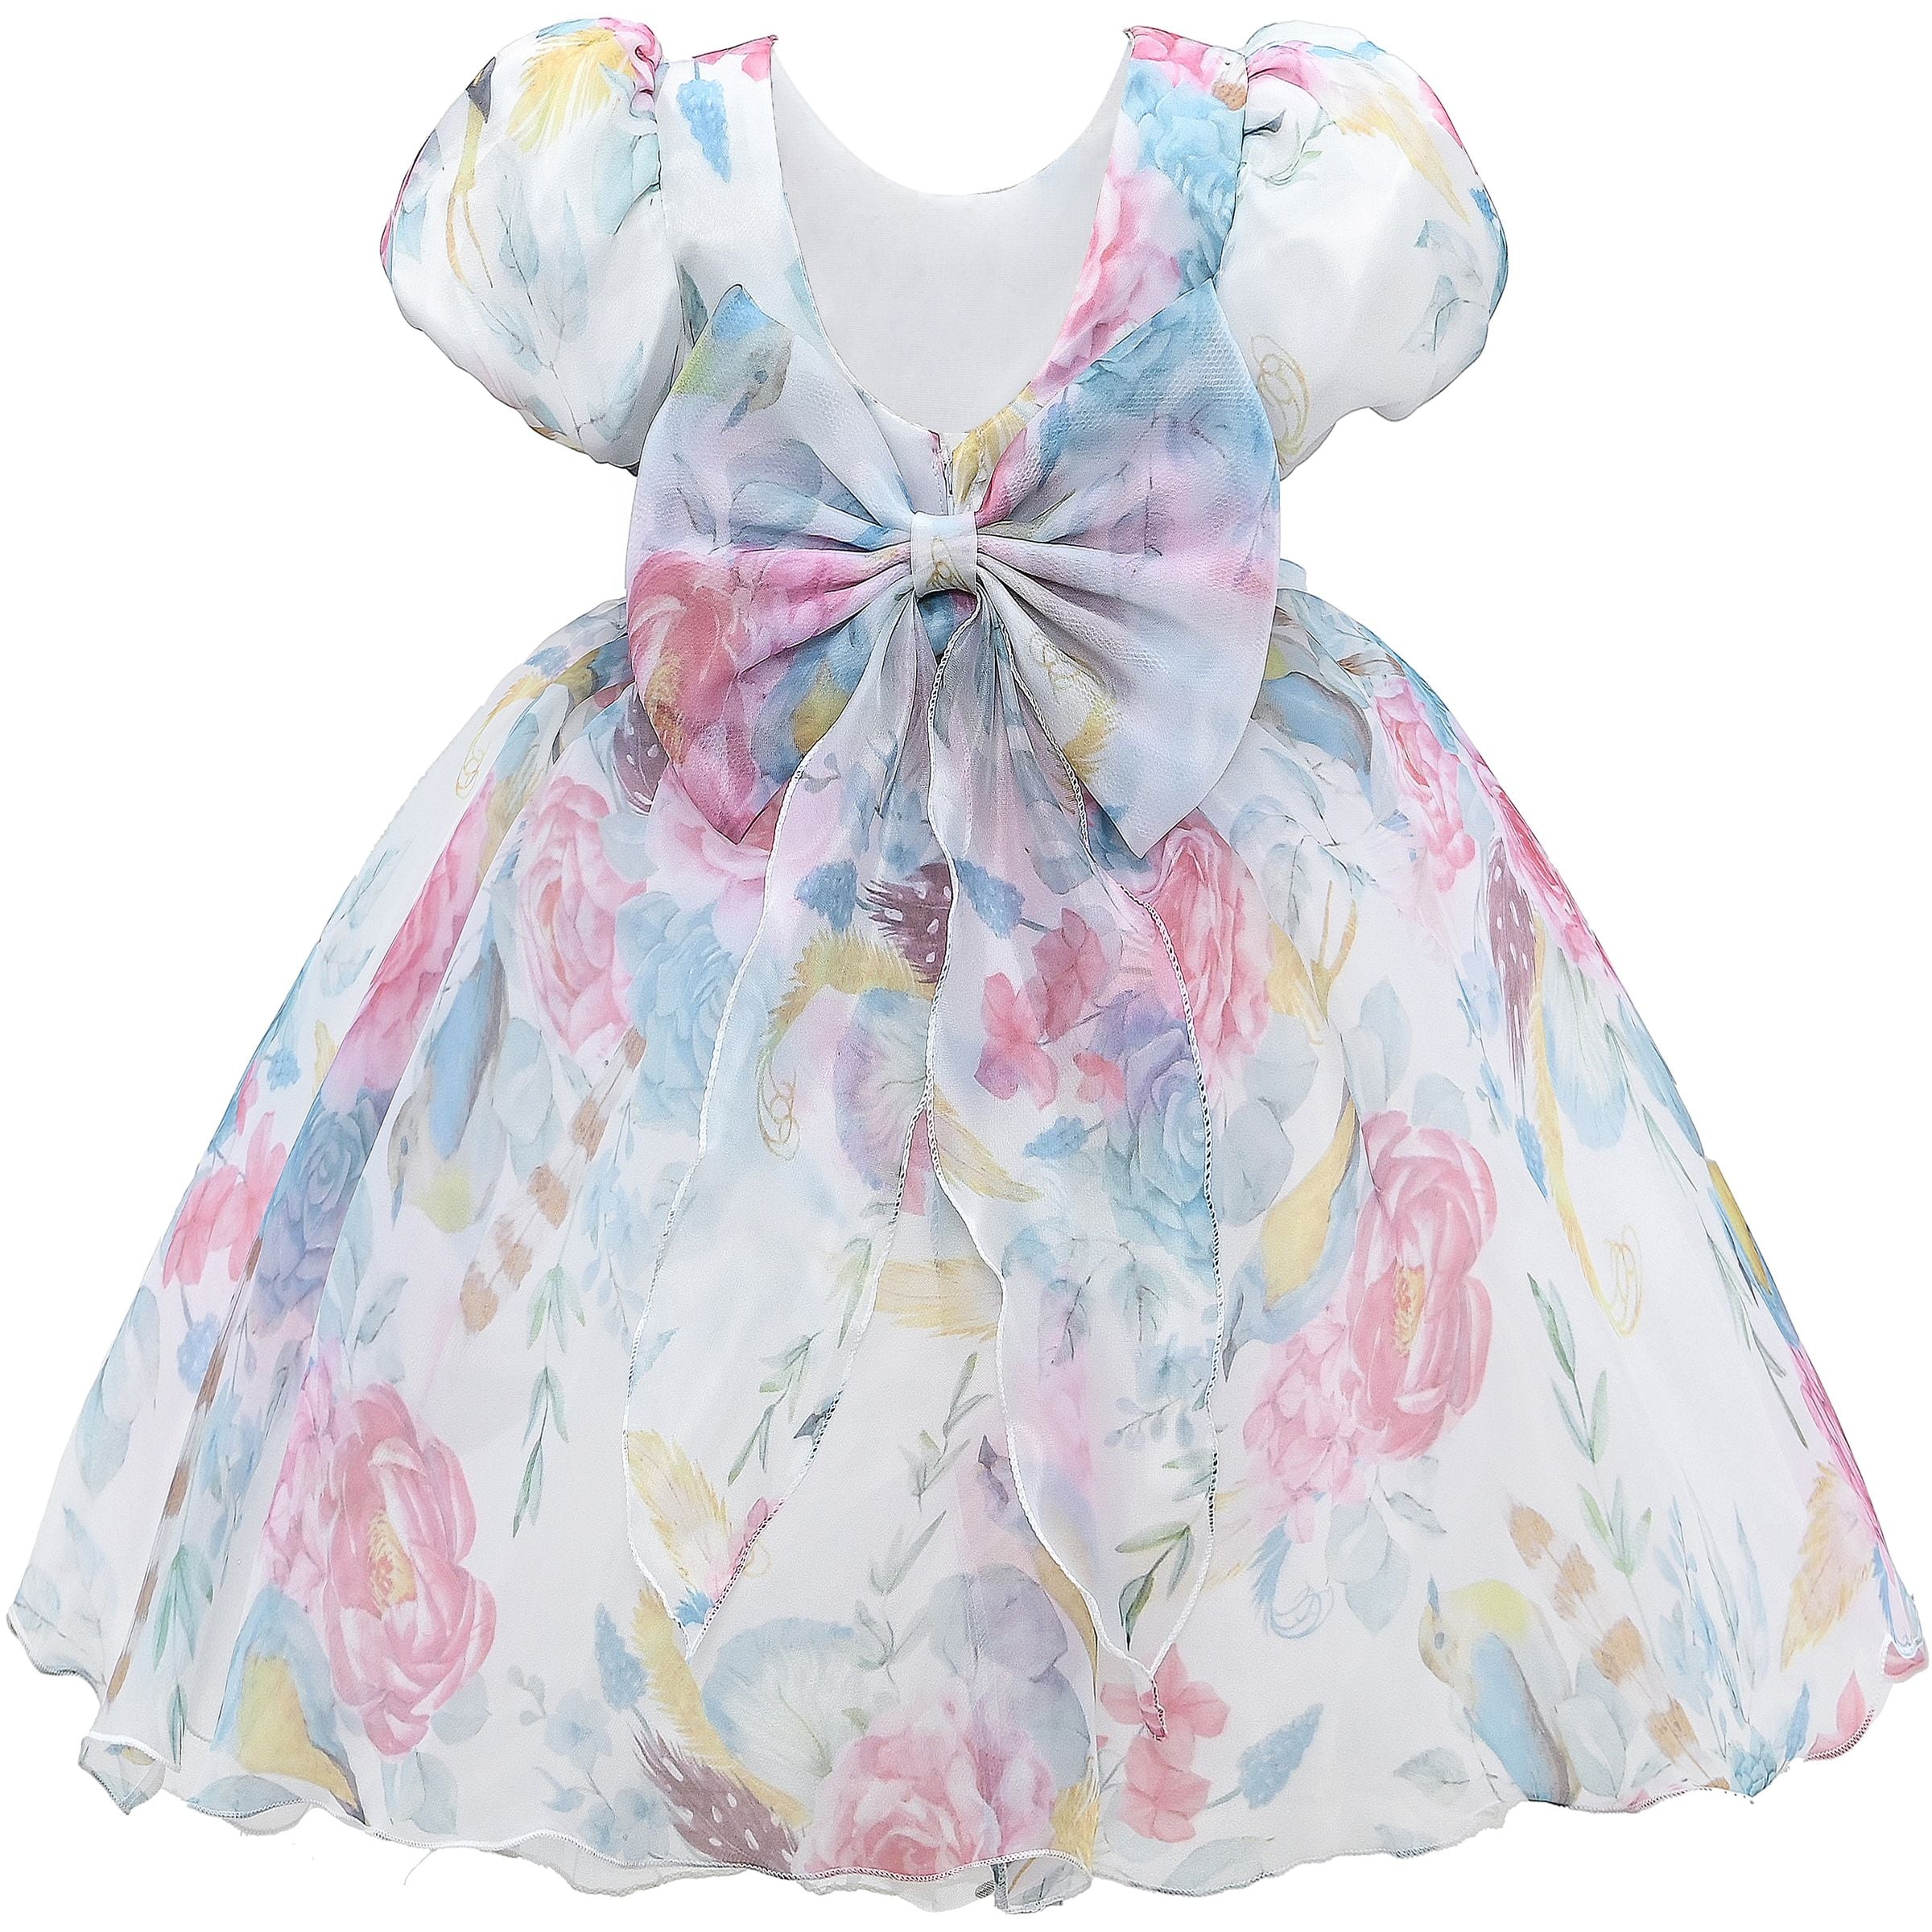 Tulleen Pink Juliana Puff Shoulder Bow Dress 1y / Pink